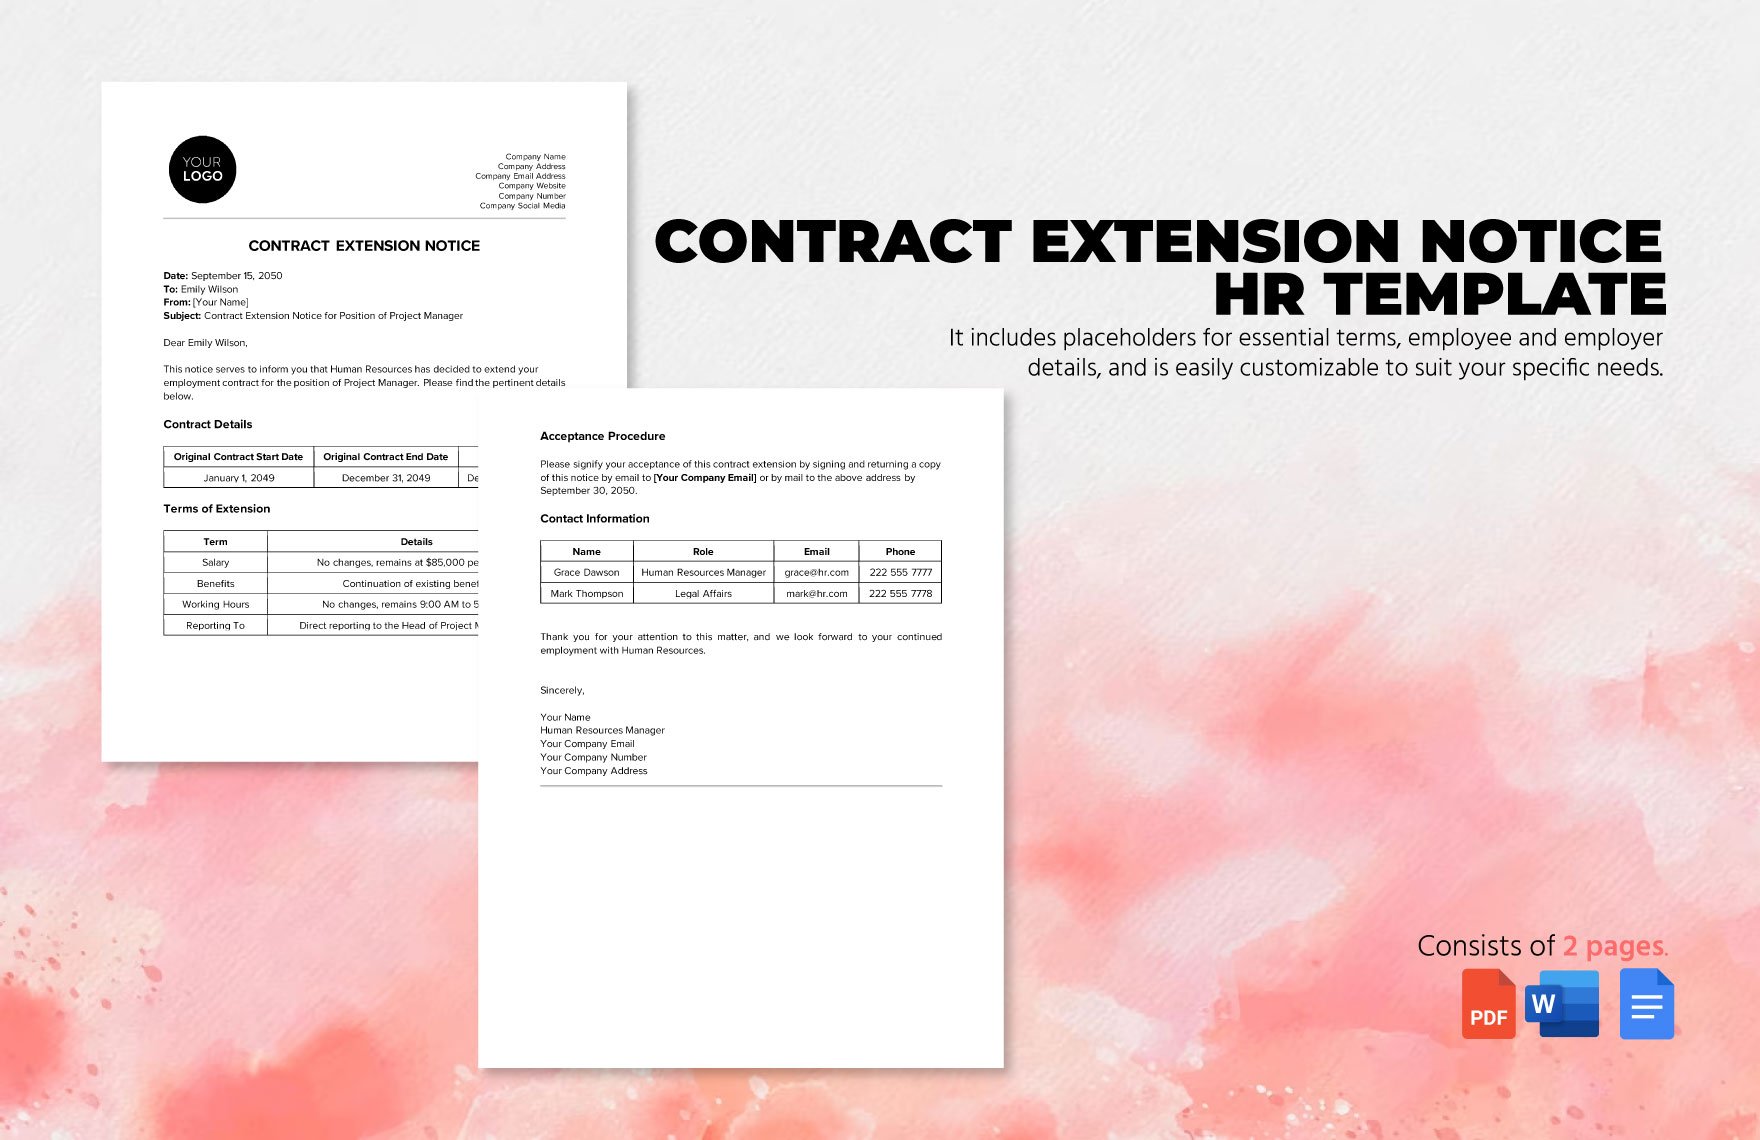 Contract Extension Notice HR Template